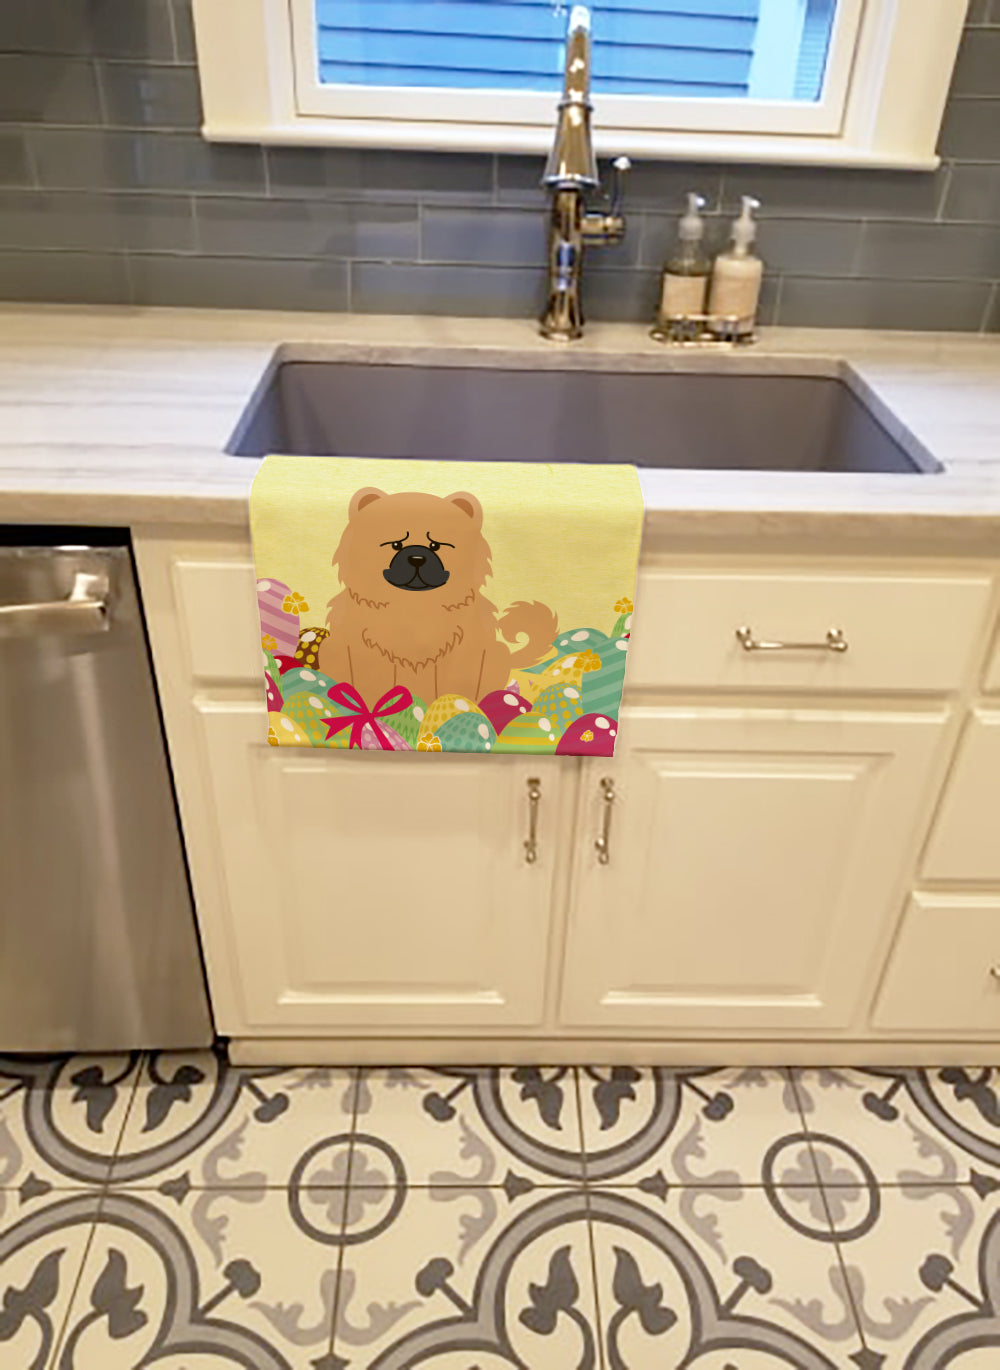 Easter Eggs Chow Chow Cream Kitchen Towel BB6144KTWL - the-store.com